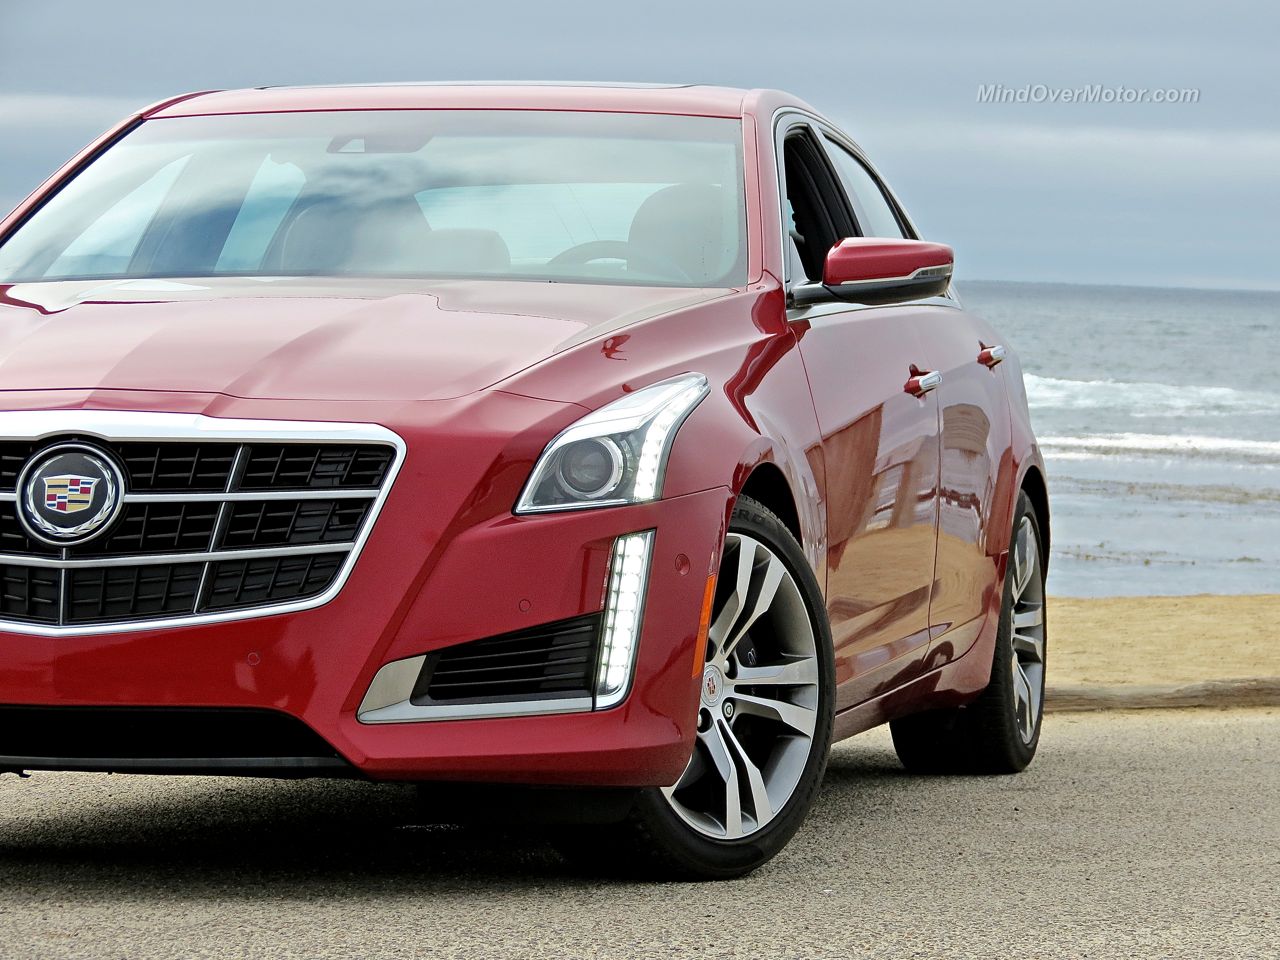 2015 Cadillac CTS Vsport Review | Mind Over Motor